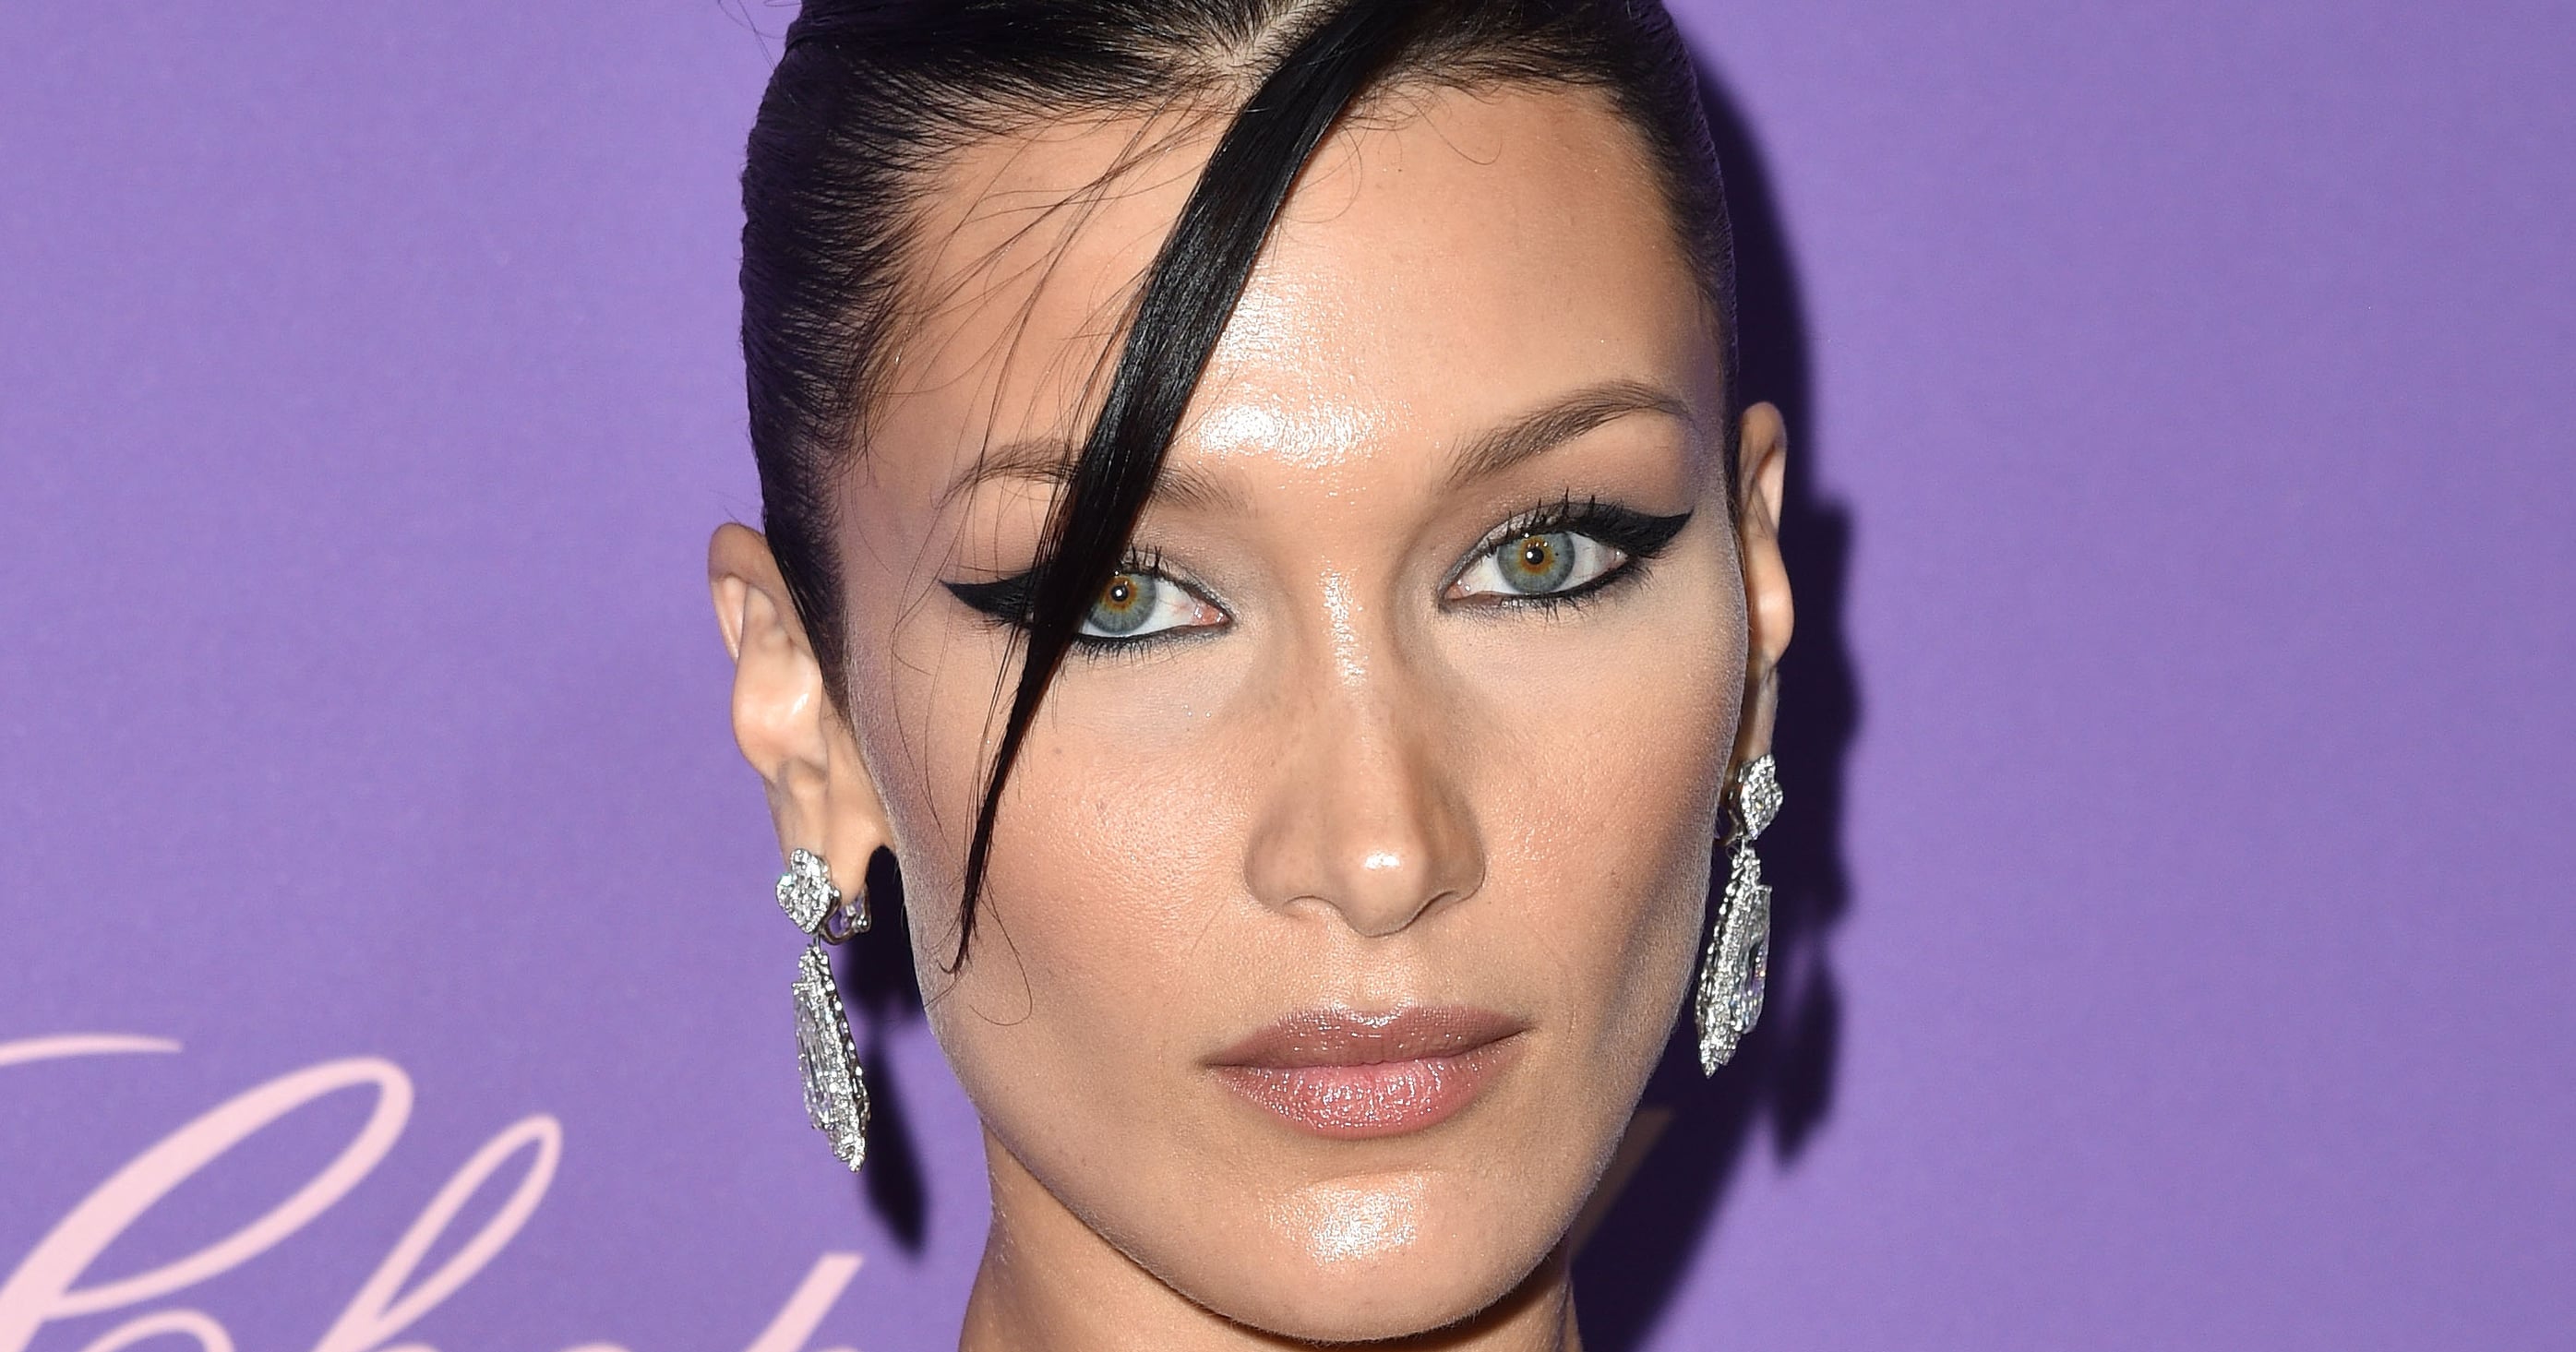 Bella Hadid bringing back worst trends of the '90s and aughts